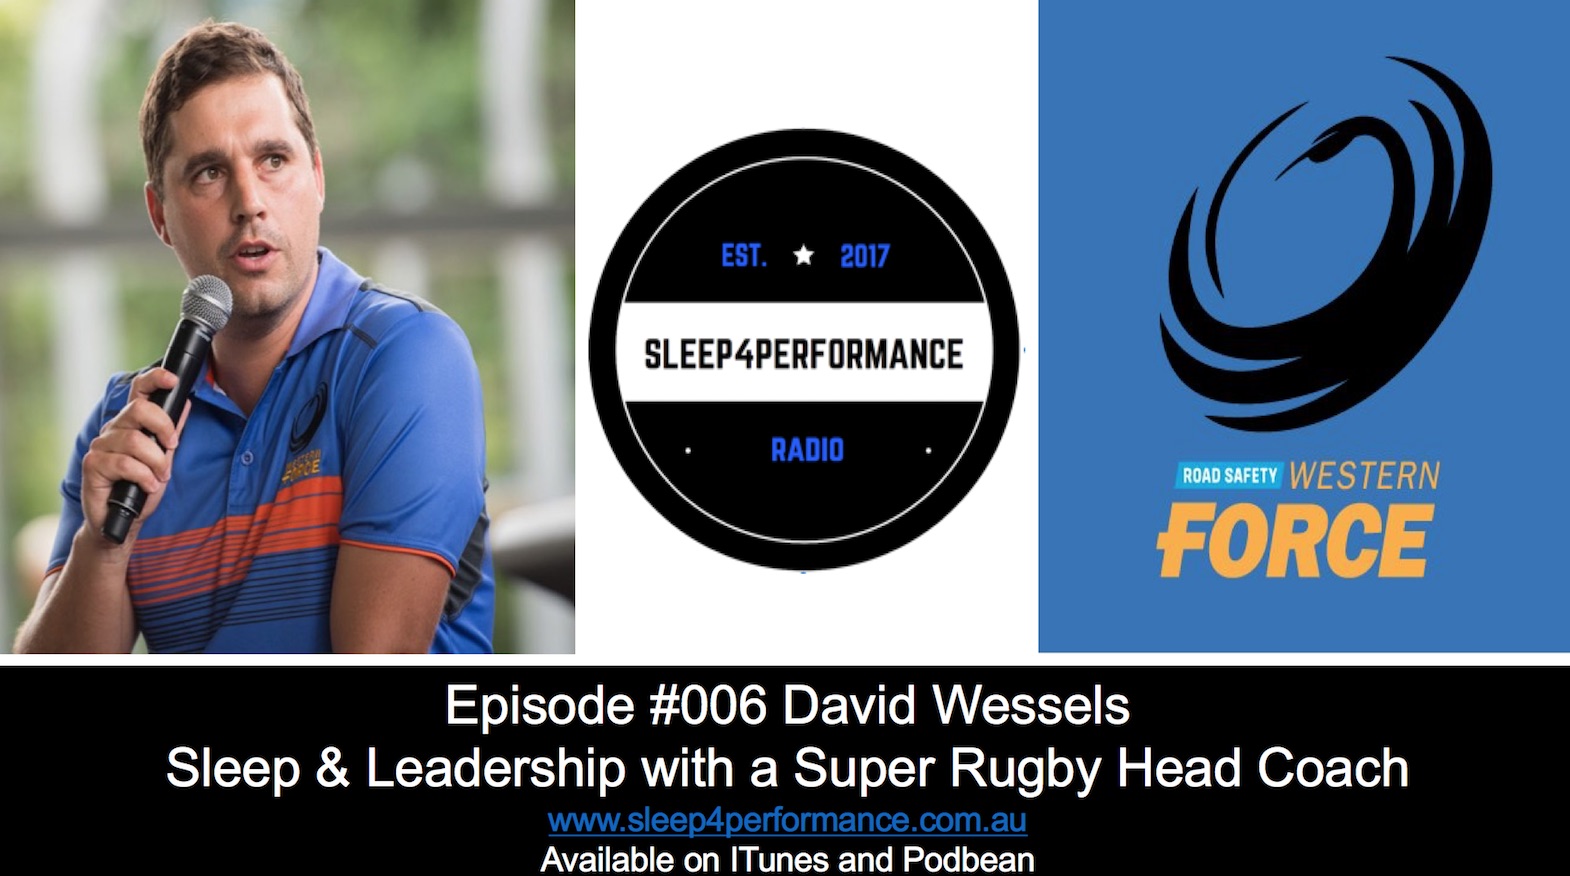 Season1 #Episode 5: David Wessels-How a Super Rugby coach manages sleep